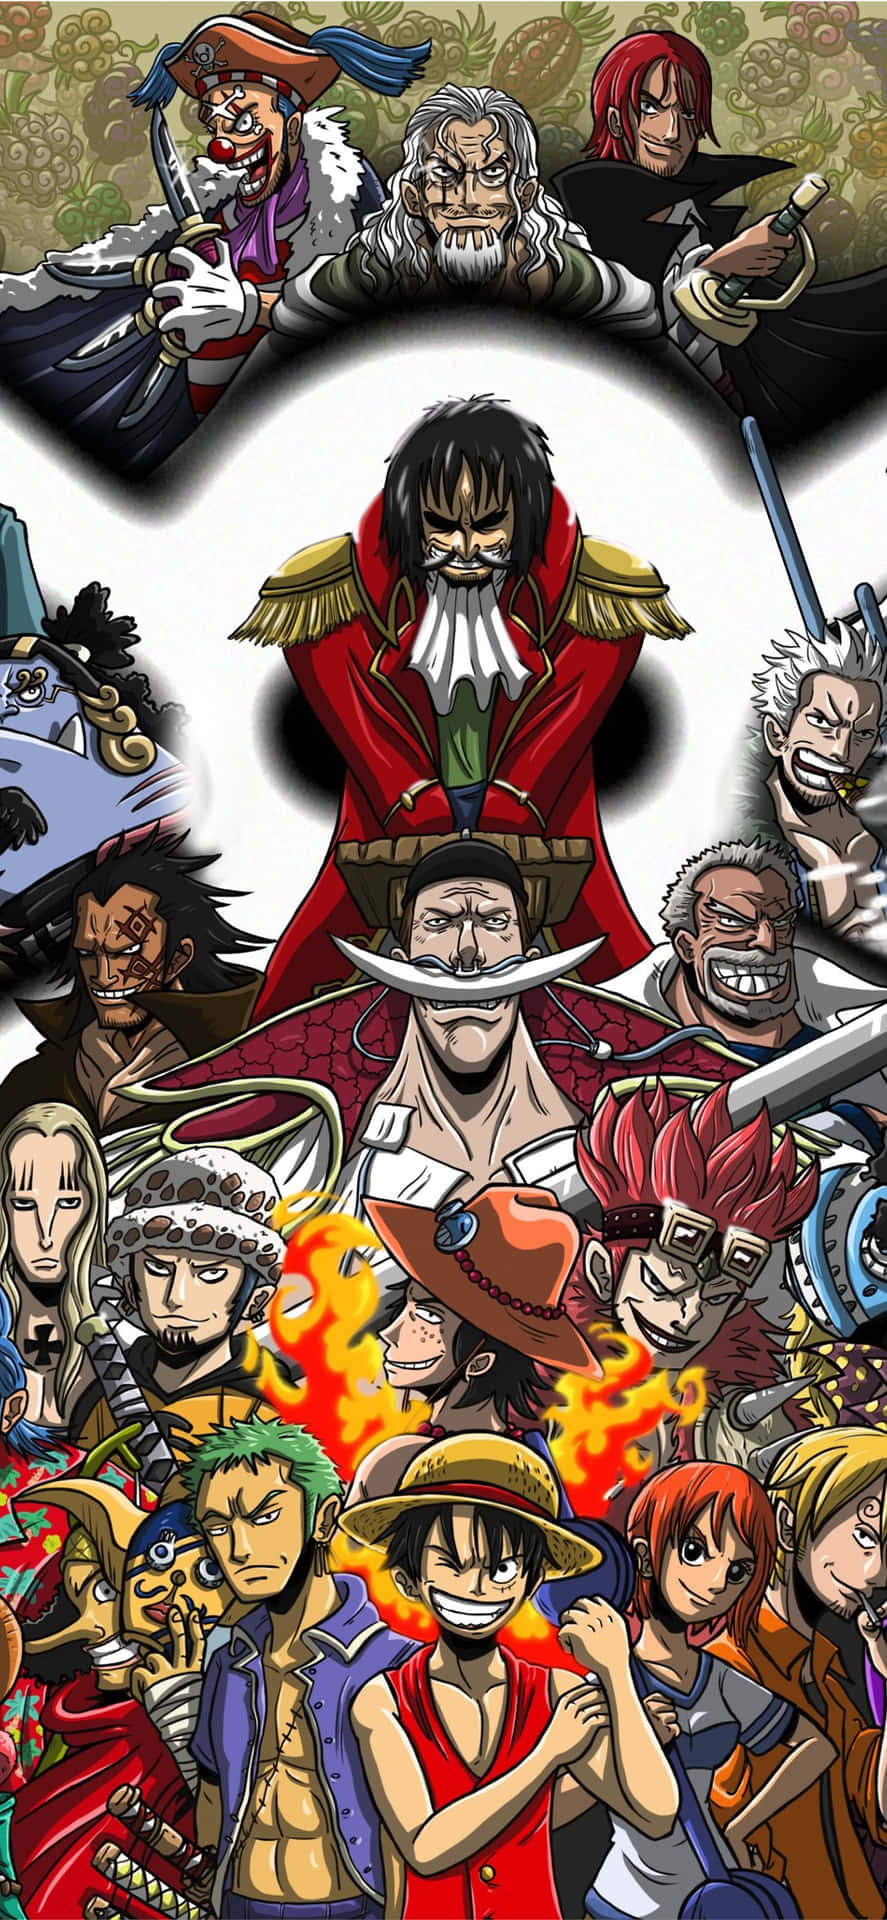 Cool Anime Iphone One Piece Cast Wallpaper